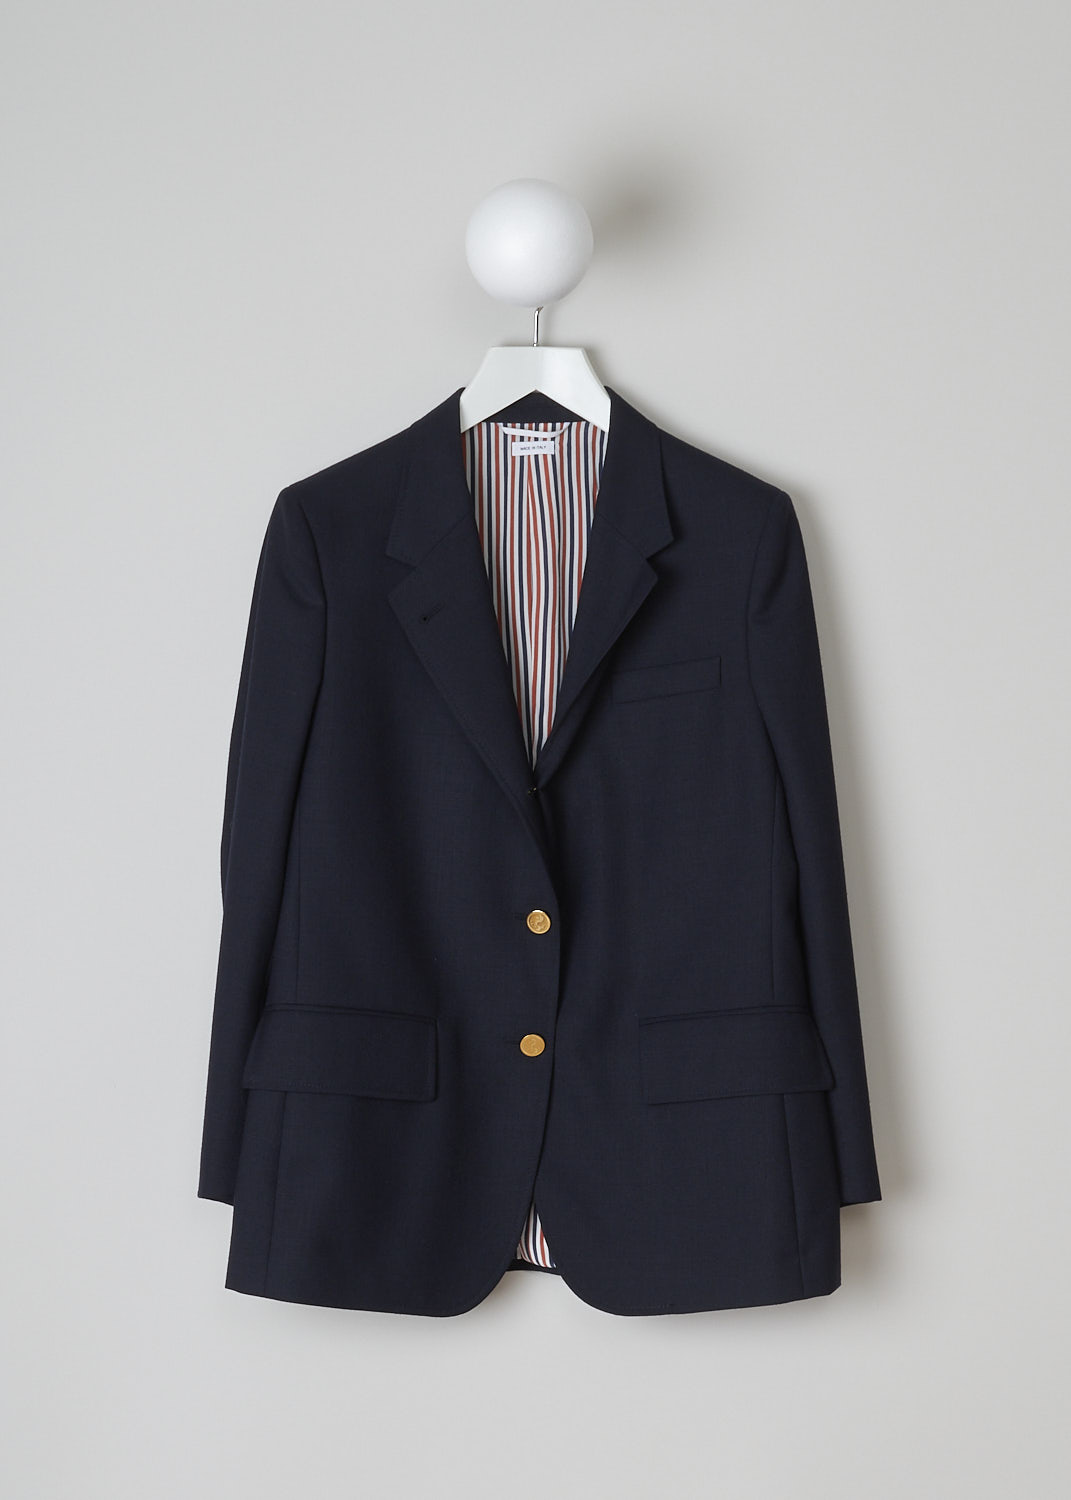 THOM BROWNE, DARK NAVY WIDE LAPEL SPORT JACKET, FBC357A_00473_415, Blue, Front, This dark navy sport jacket has a wide notched lapel and a front button closure with gold-tone buttons. The long sleeves have buttoned cuffs. In the front, the jacket has a single breast pocket and two flap welt pockets. O the inside, the jacket has a striped lining, three inner pockets and a name tag. The brand's signature grosgrain loop tab can be found in the back. The jacket has a double vent. 
